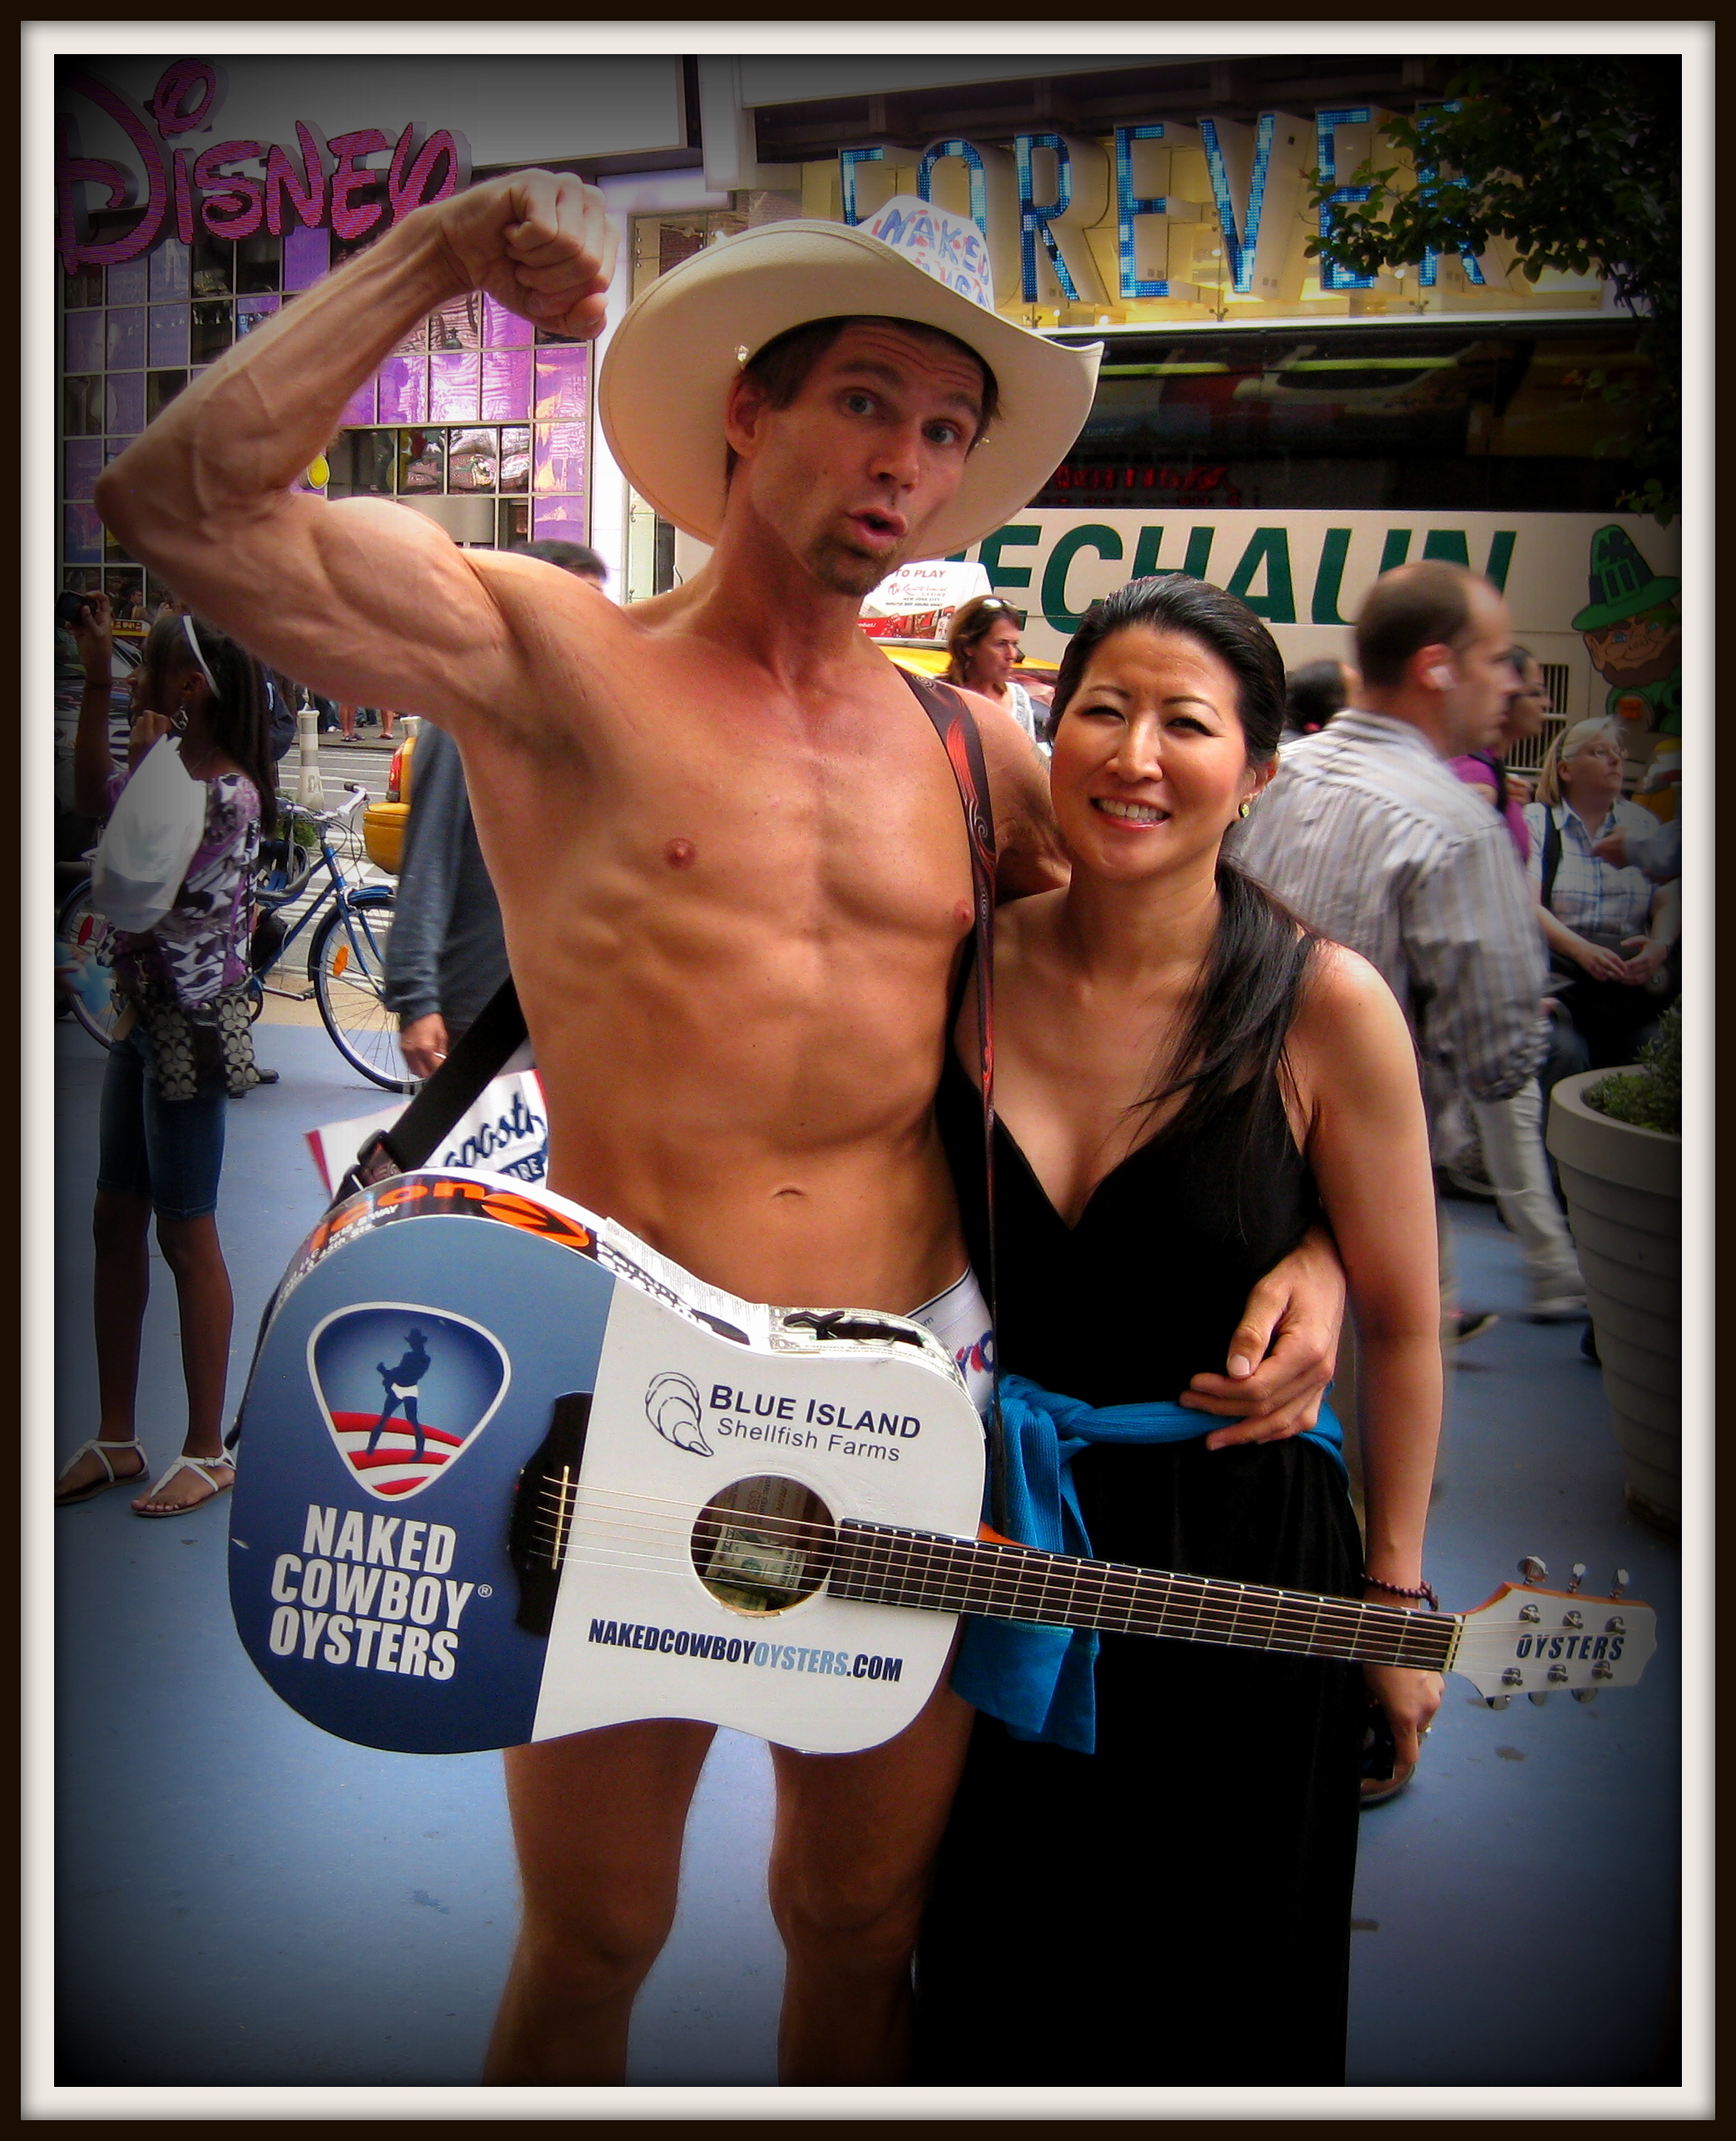 Lil Rhee with the Naked Cowboy in Times Square